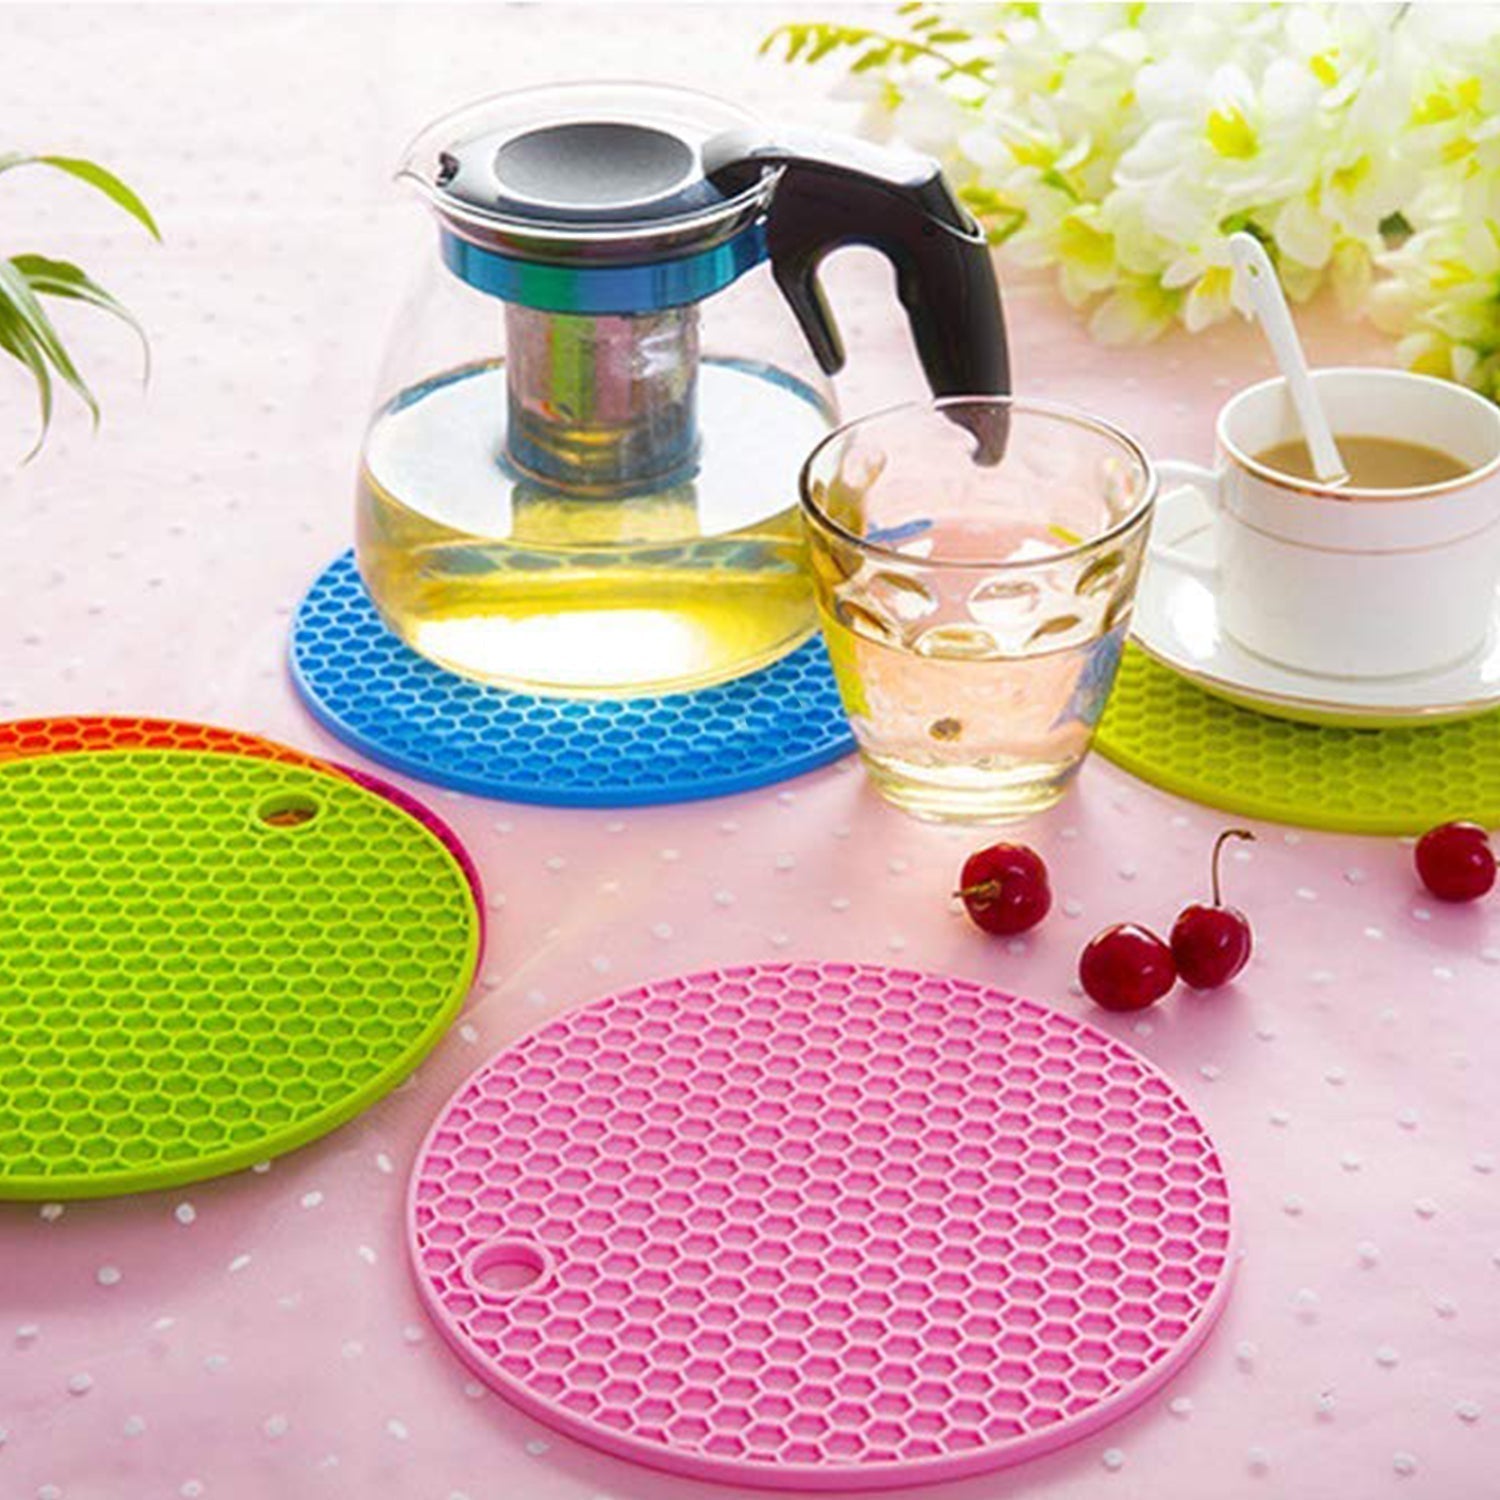 4913 Silicone Trivet for Hot Dish and Pot, Silicone Hot Pads ( 1 pcs )